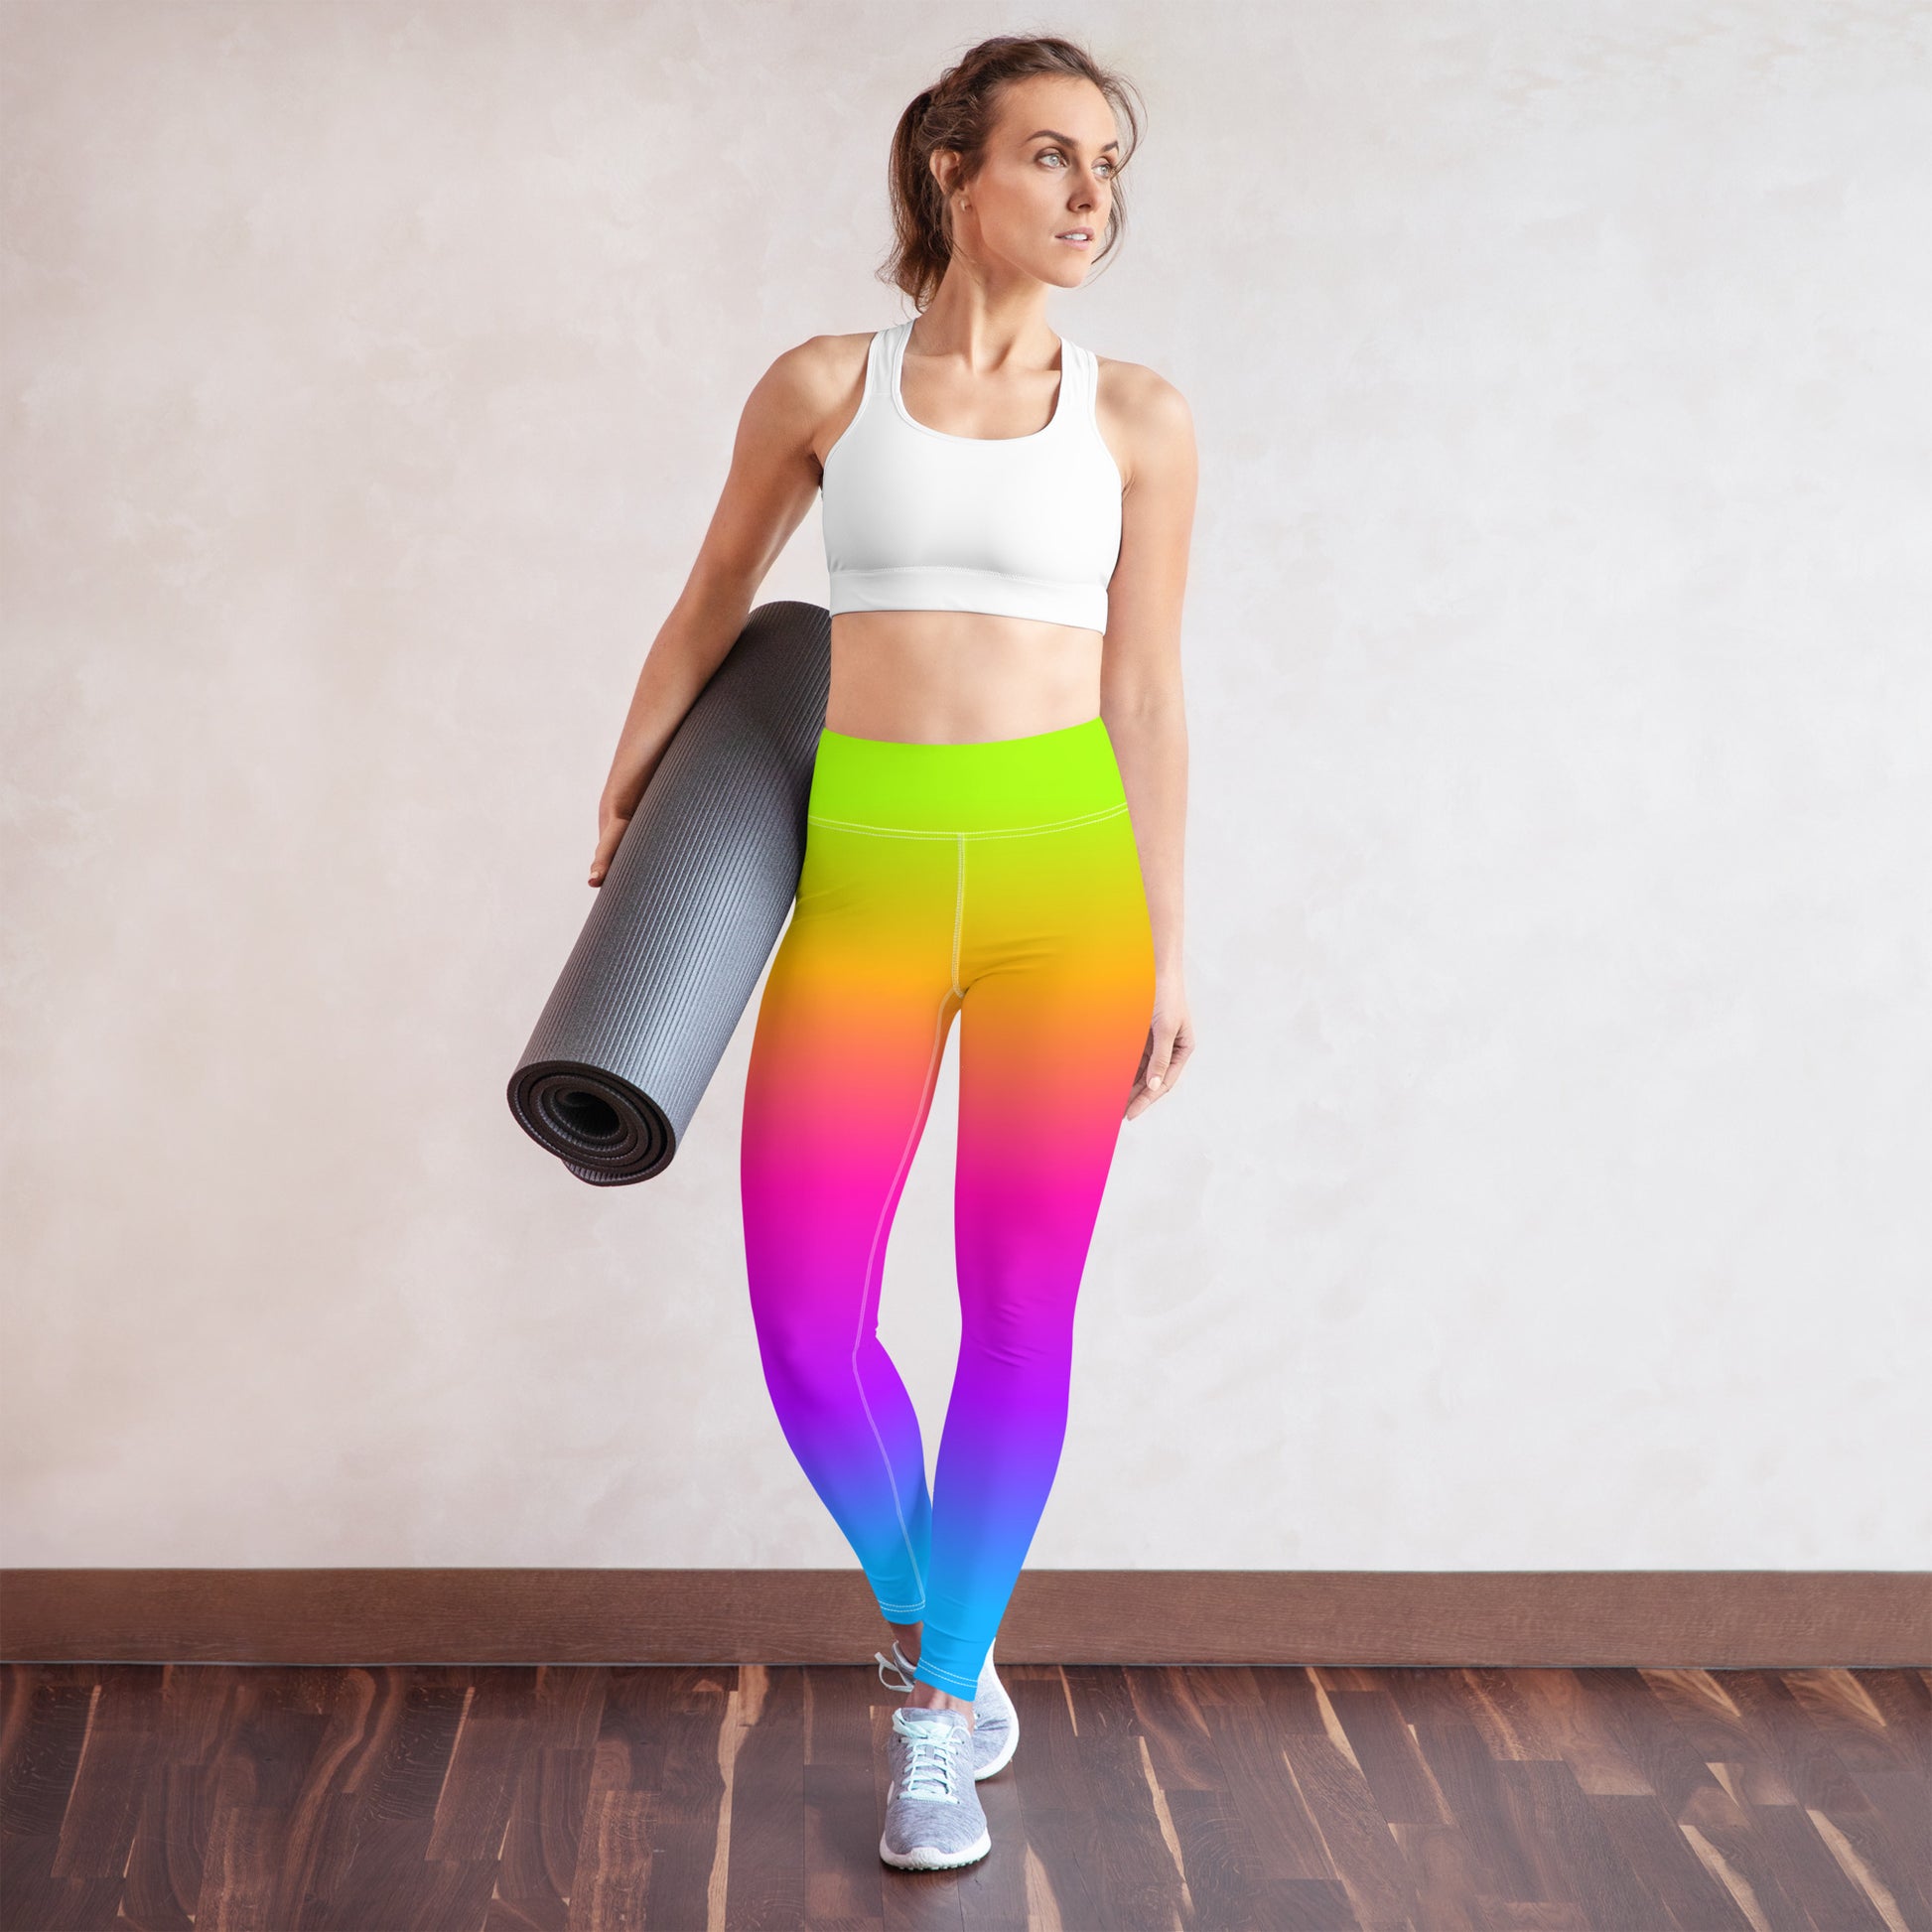 Rainbow Yoga Leggings Women, Tie Dye Gradient Ombre High Waisted Pants Pockets Cute Printed Workout Running Gym Designer Tights Starcove Fashion